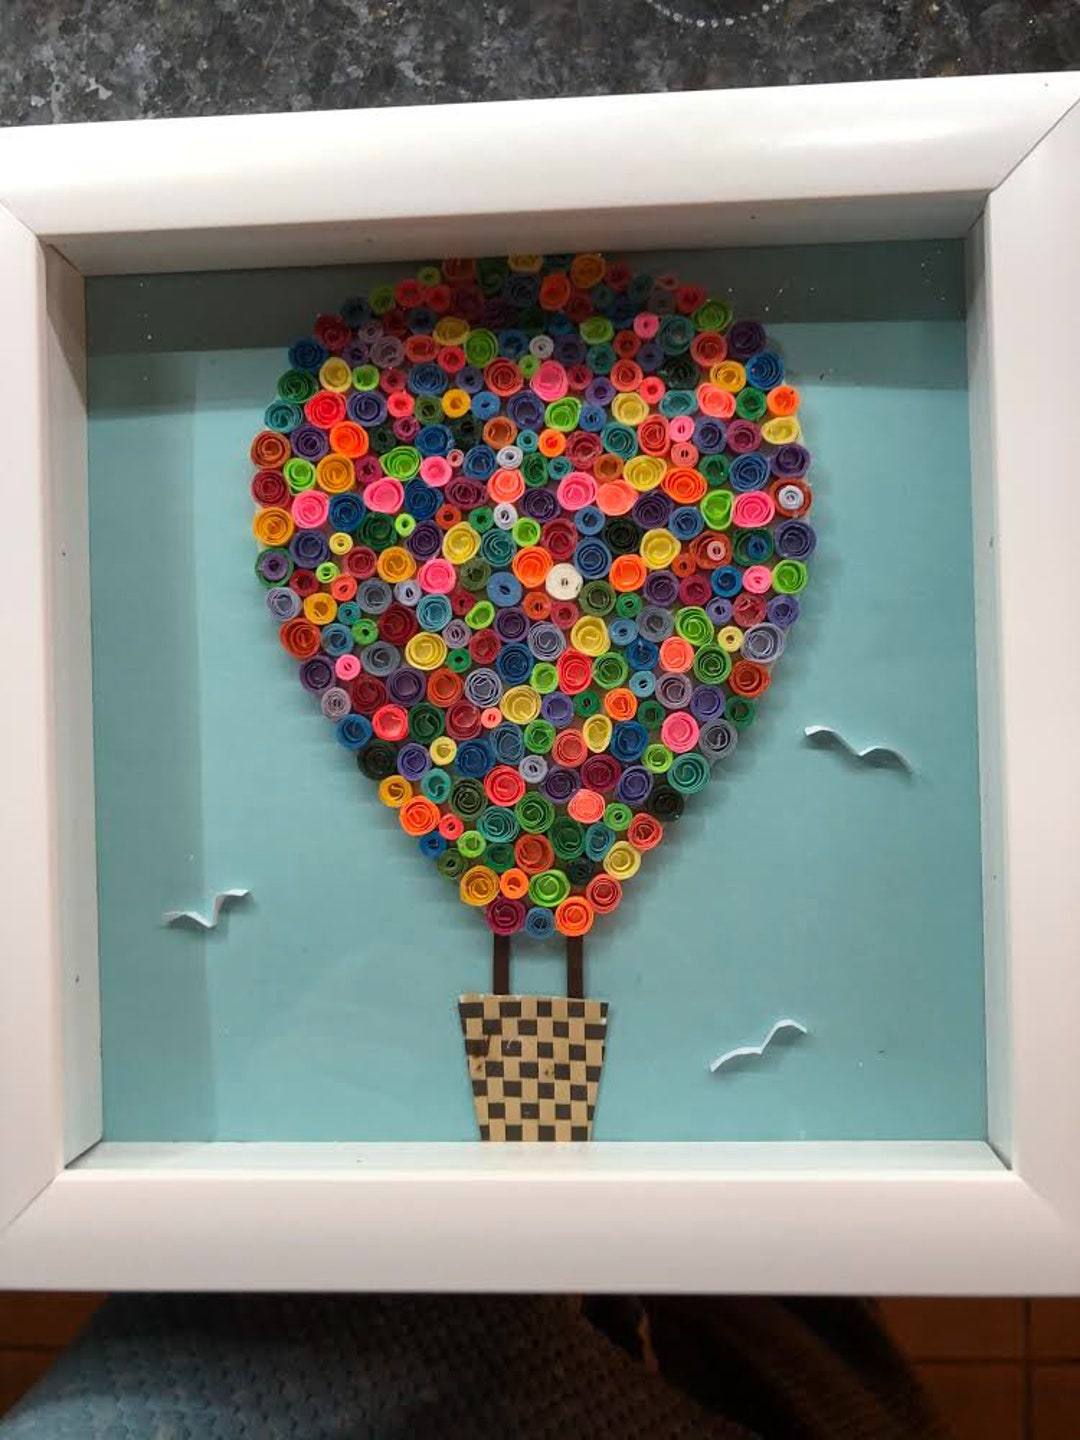 Quilling Kit - Hot Air Balloon